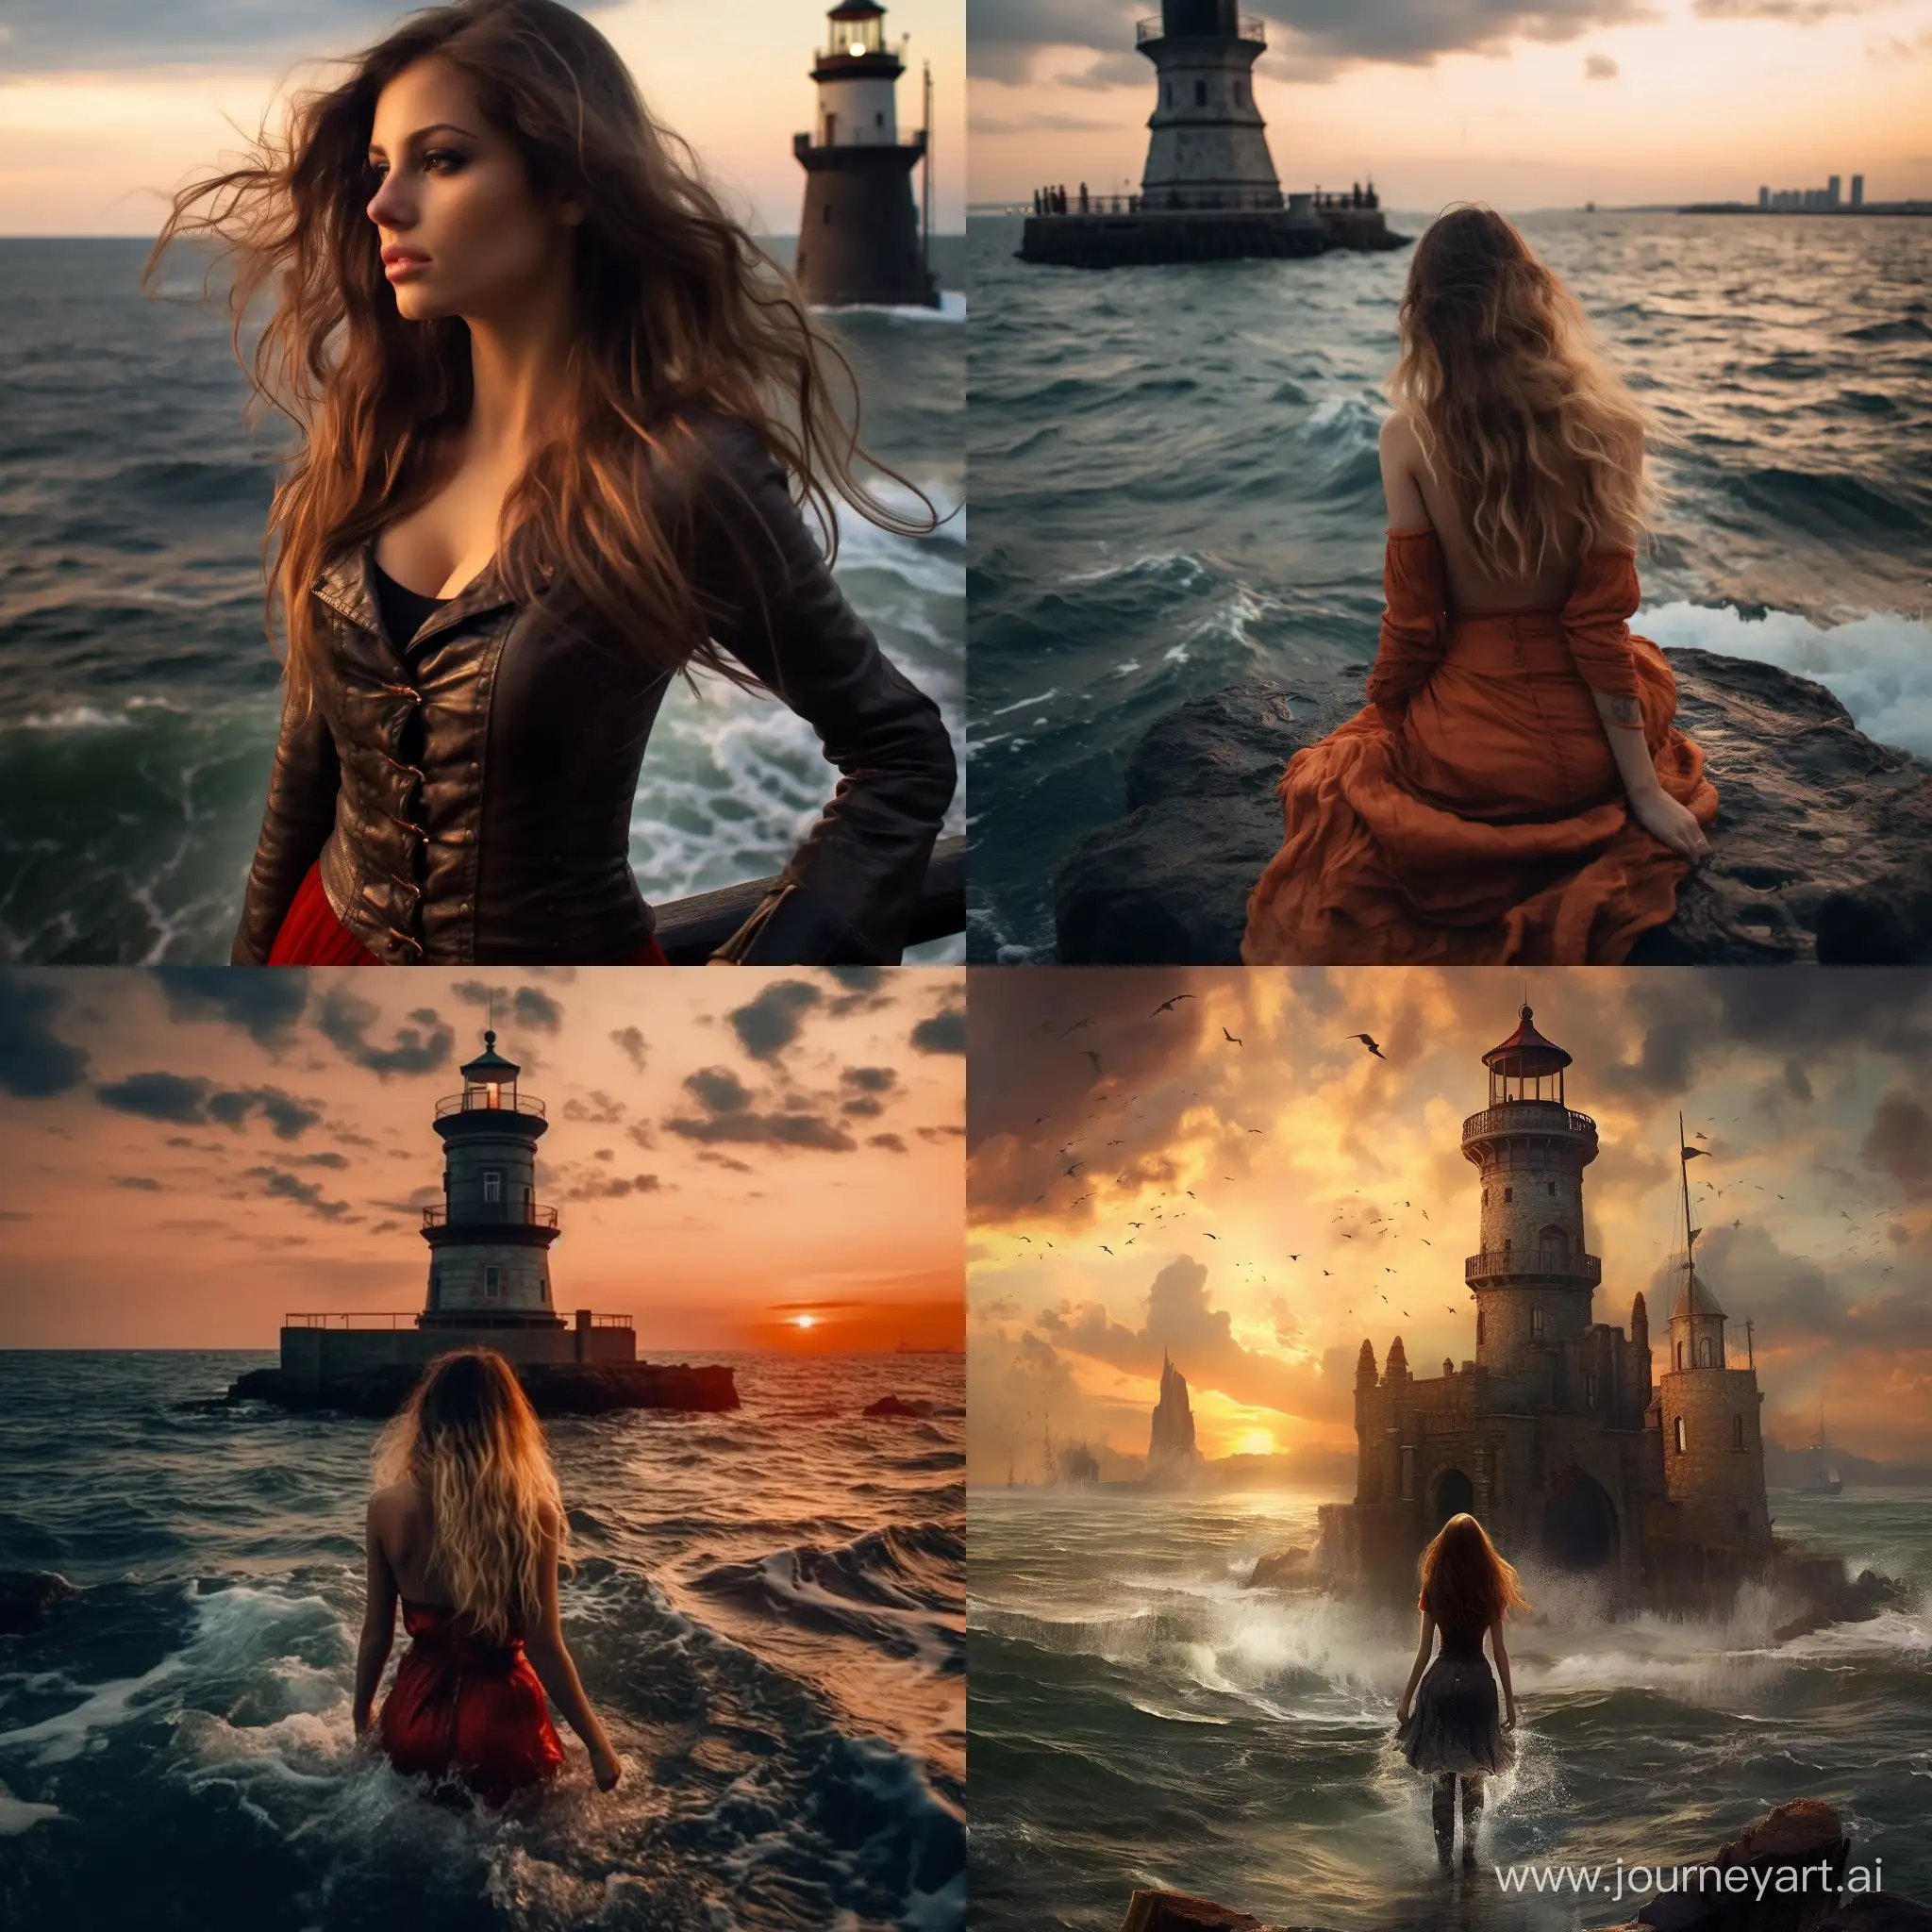 Enchanting-Seaside-Solitude-Girl-on-Maidens-Tower-in-a-Sea-of-Unmixed-Waters